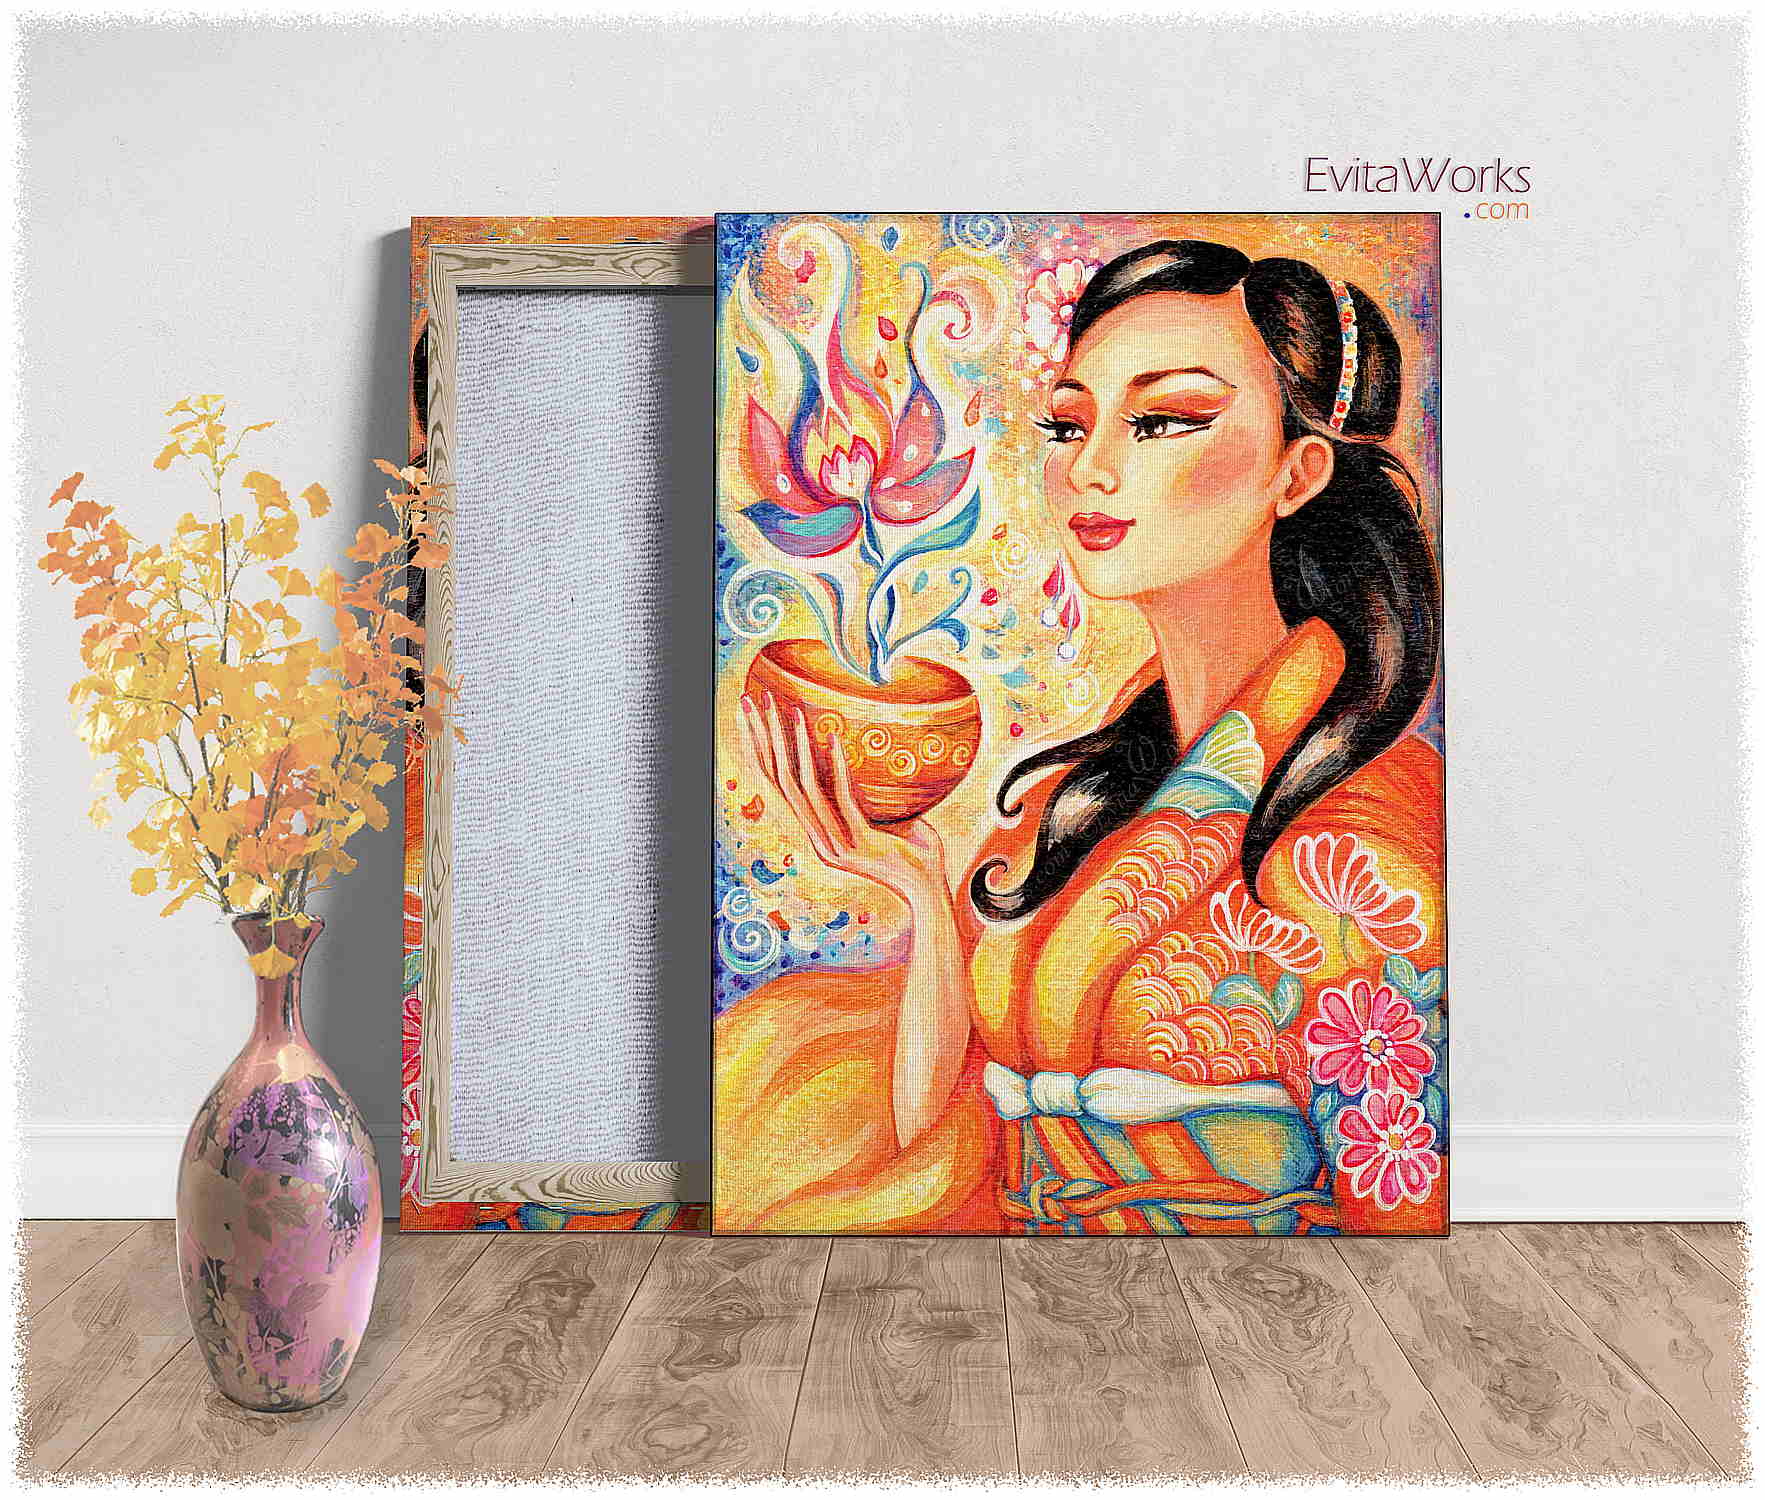 Hit to learn about "Kimono Flower, East woman, beautiful Asian art" on canvases